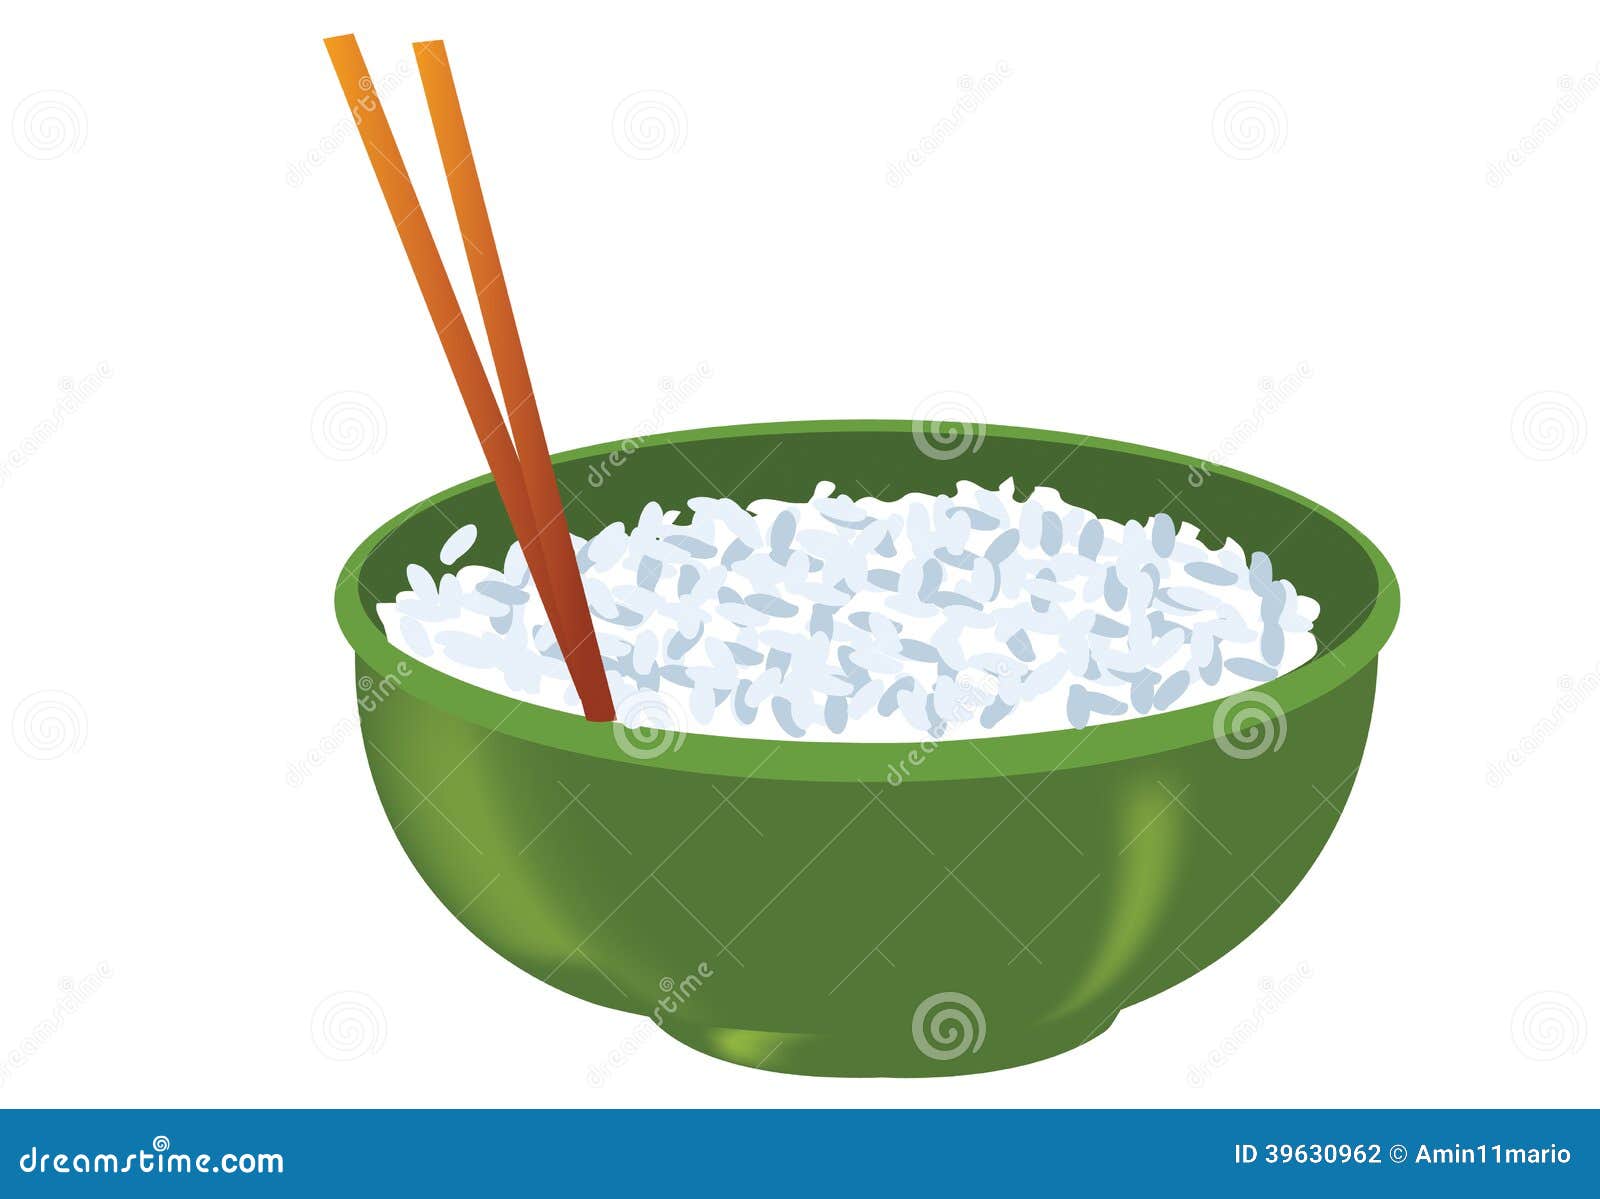 clipart of rice - photo #49